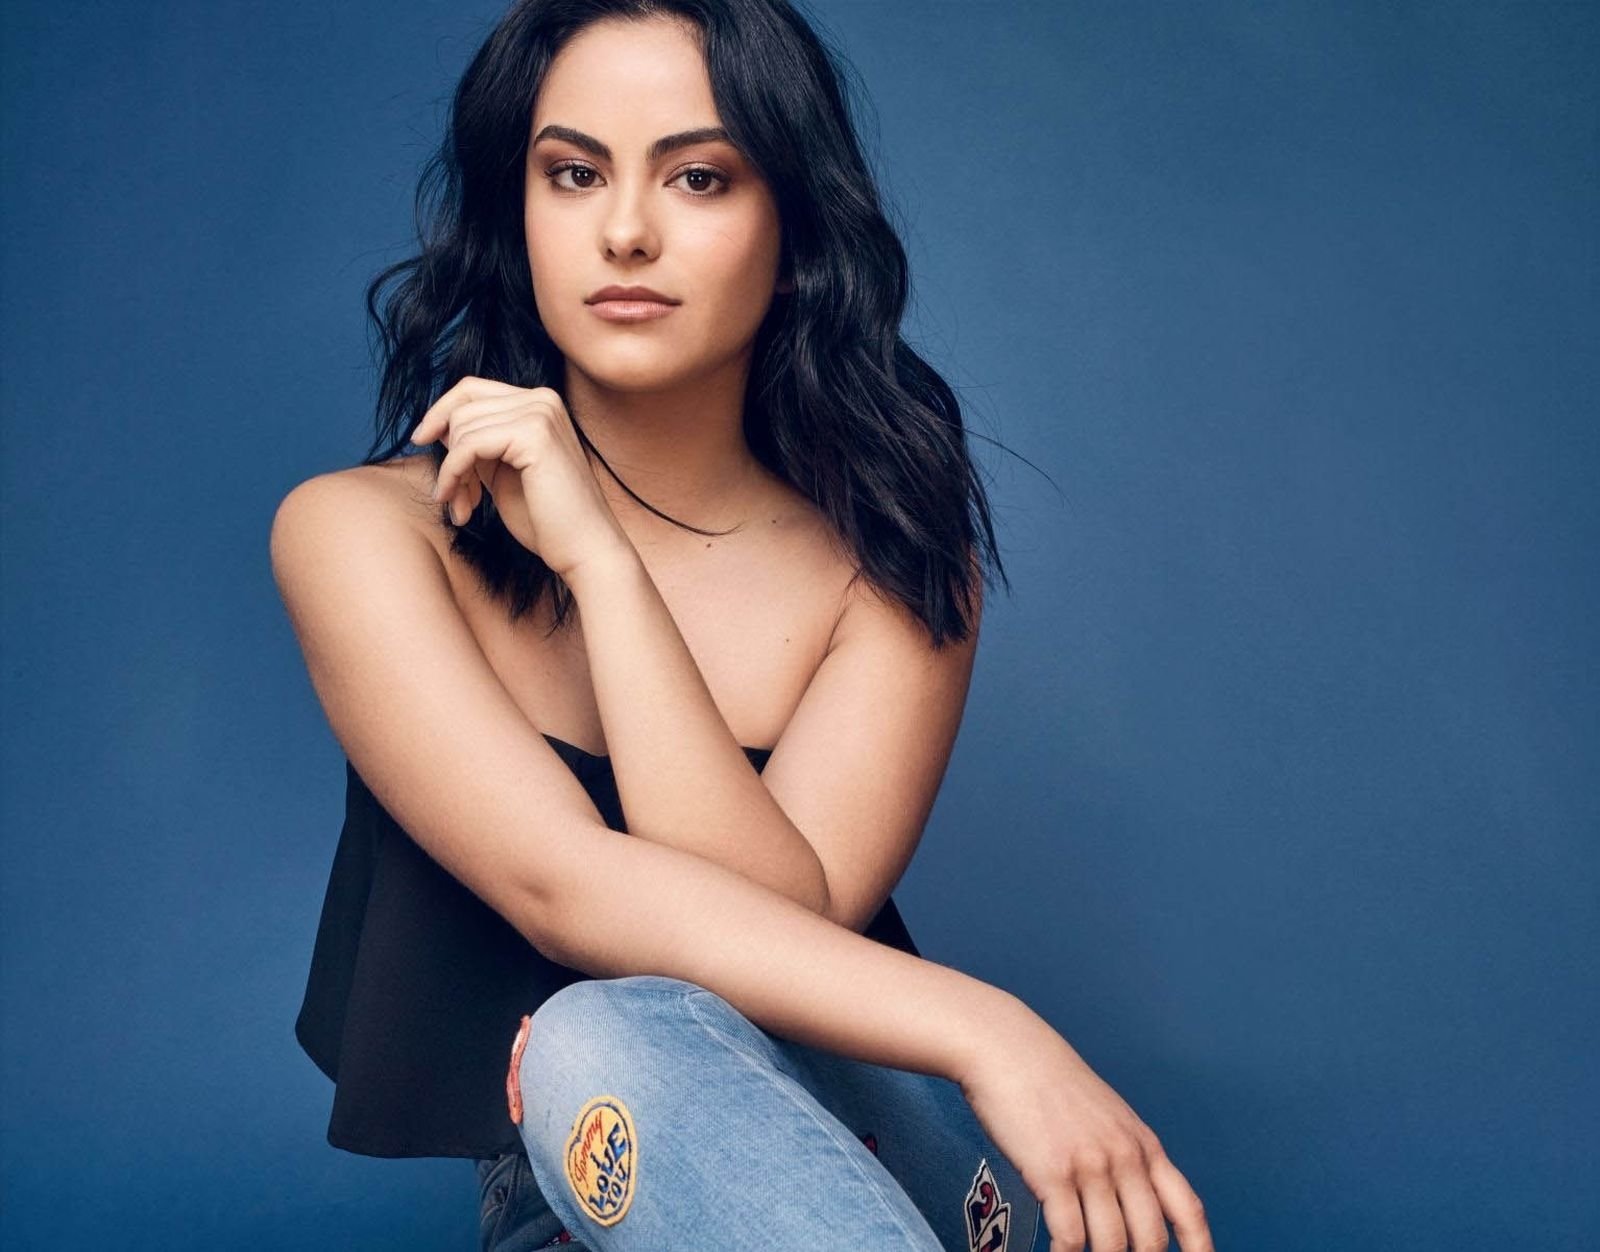 Camila Mendes Smiling Wallpapers